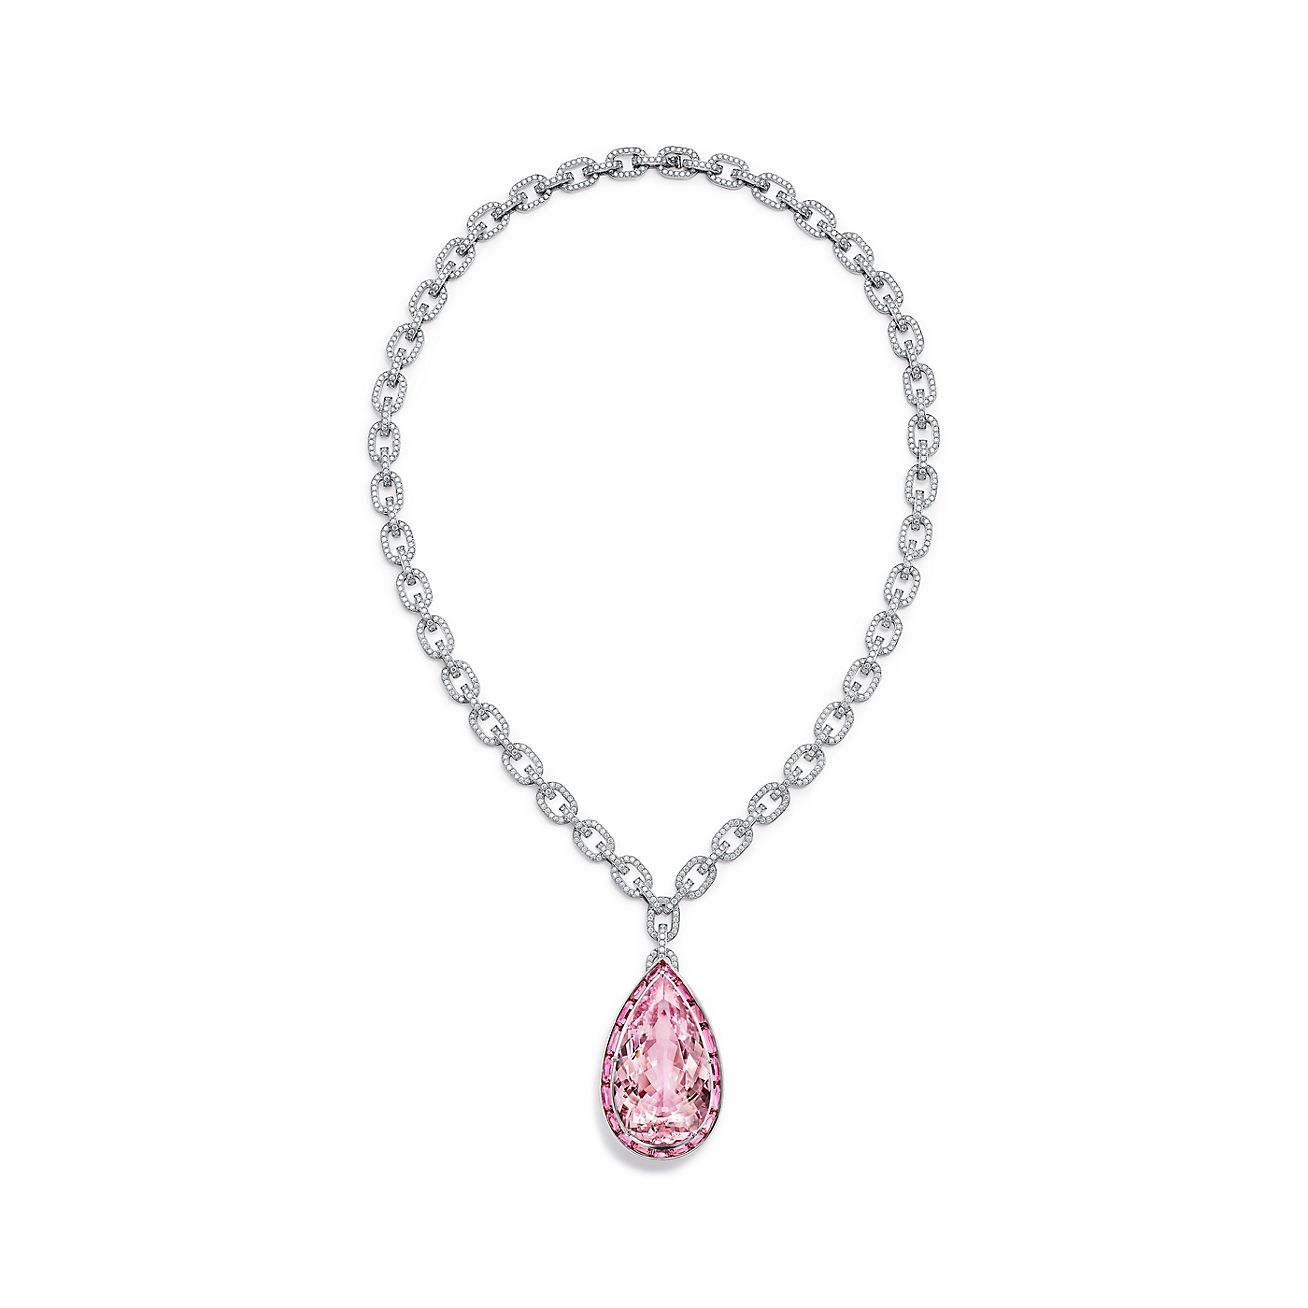 Pendant with a morganite of over 47 carats, pink tourmalines and 